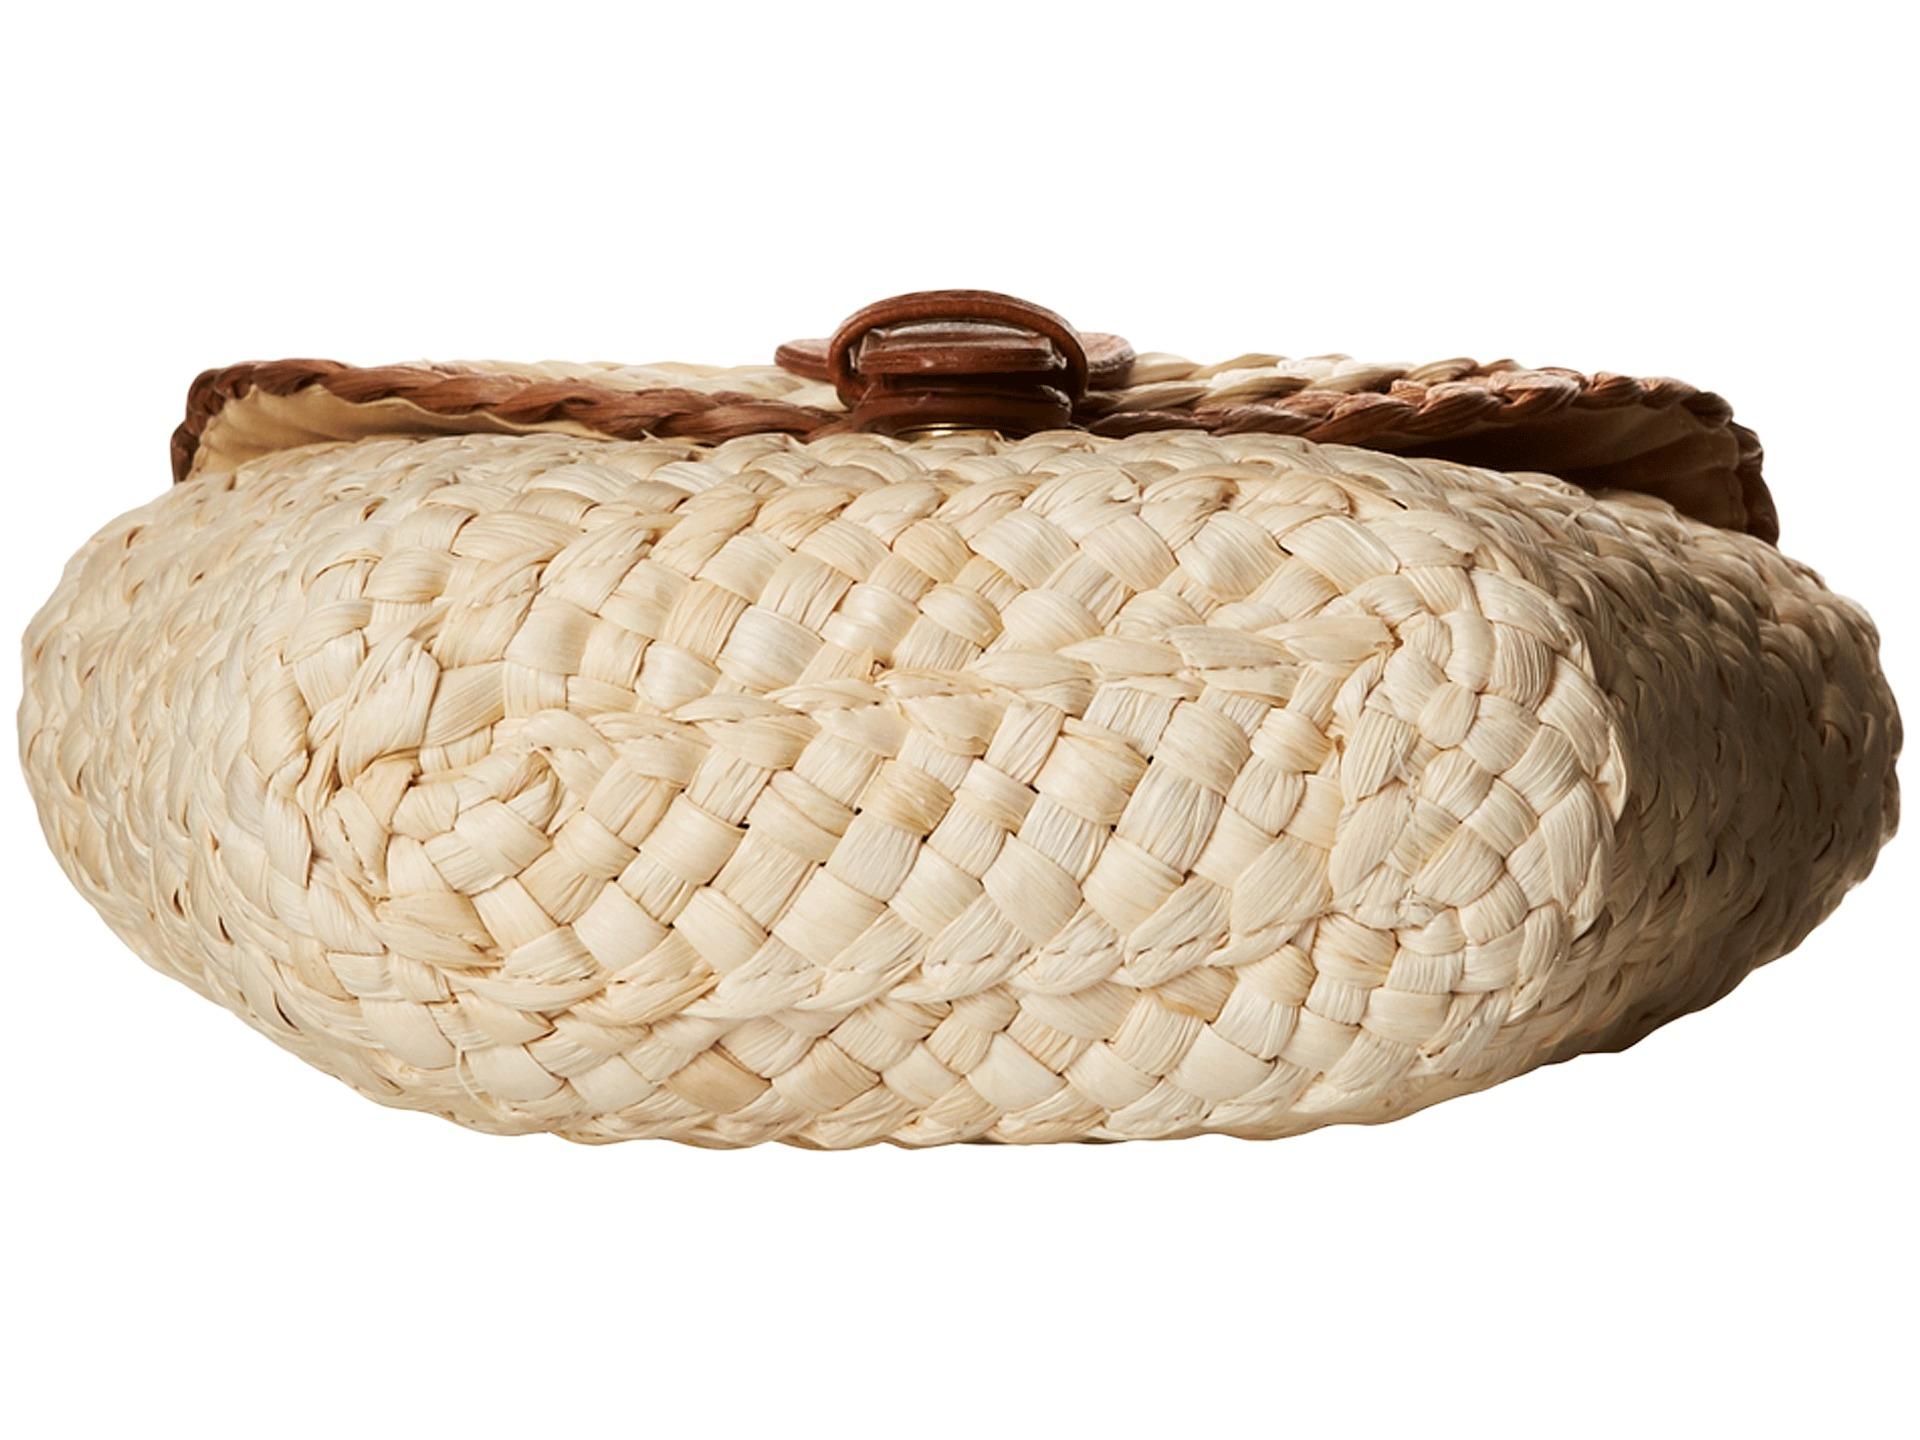 Lyst - San Diego Hat Company Bsb1360 Woven Straw Crossbody Bag W/ Adjustable Strap in Natural